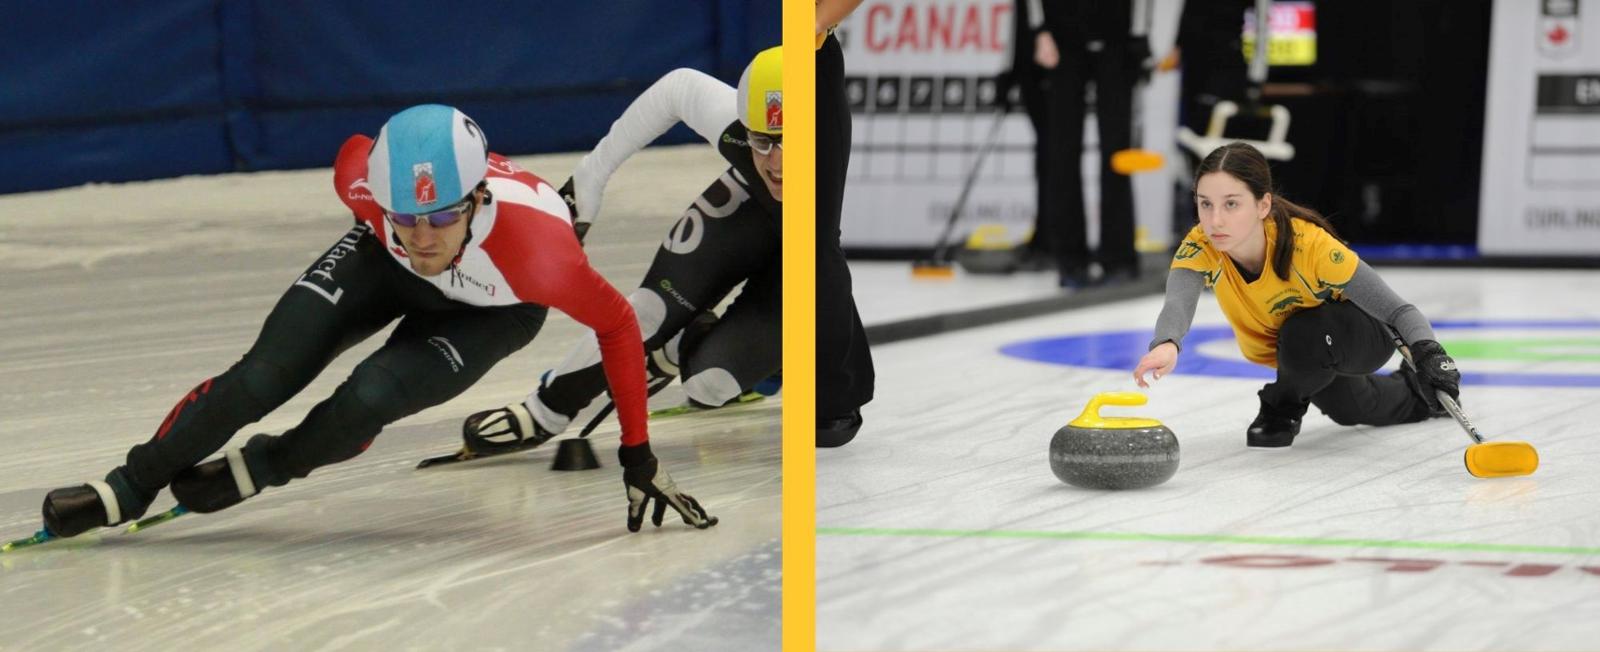 Student-athlete speed skater and curler compete in their individual sport competitions.